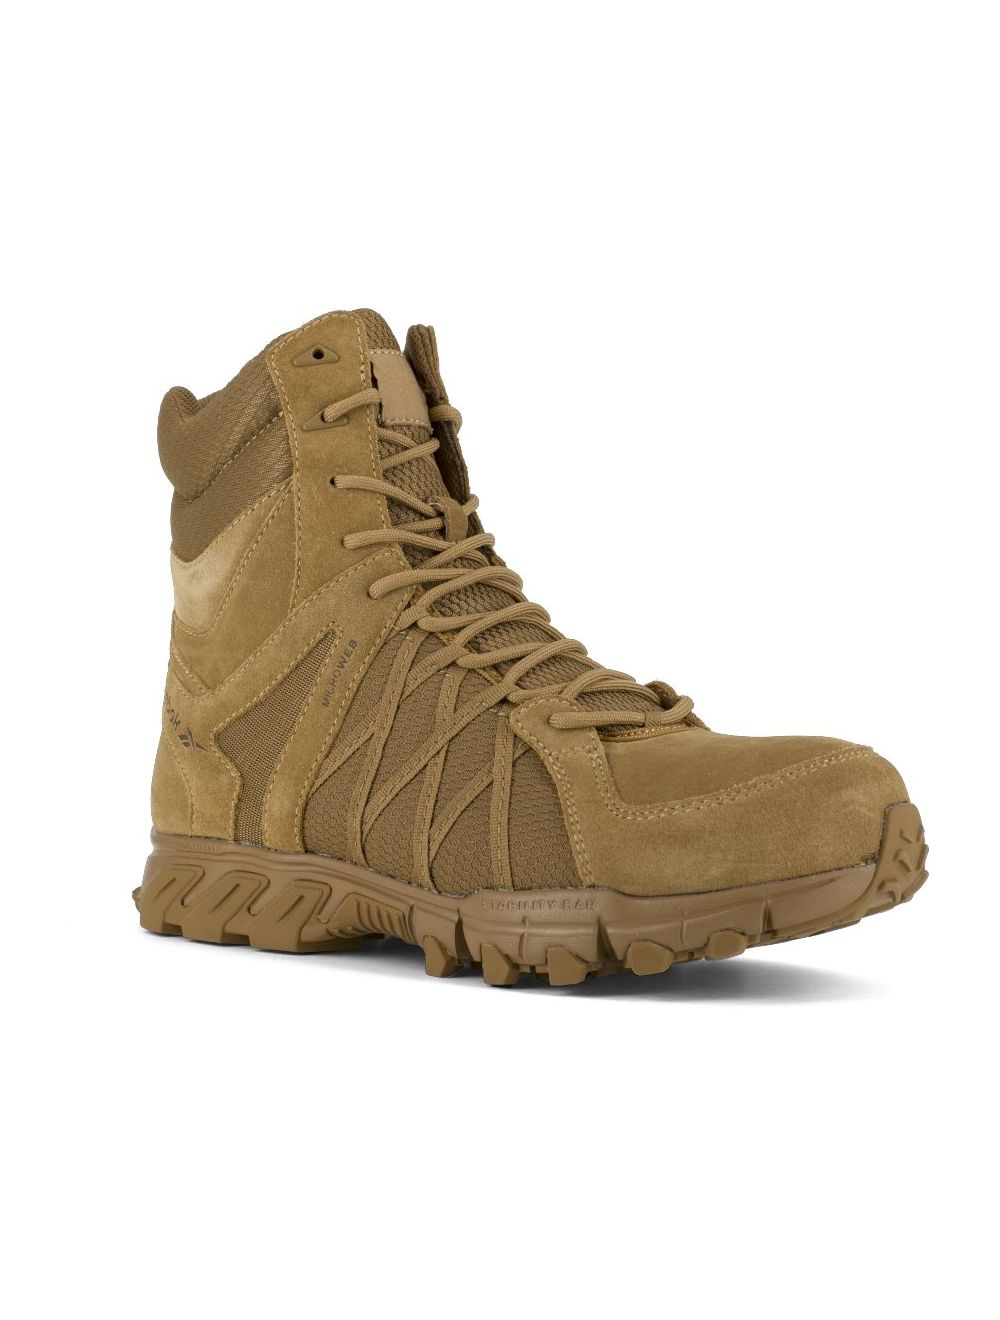 Trailgrip Tactical 8'' Boot w/ Composite Toe - Coyote